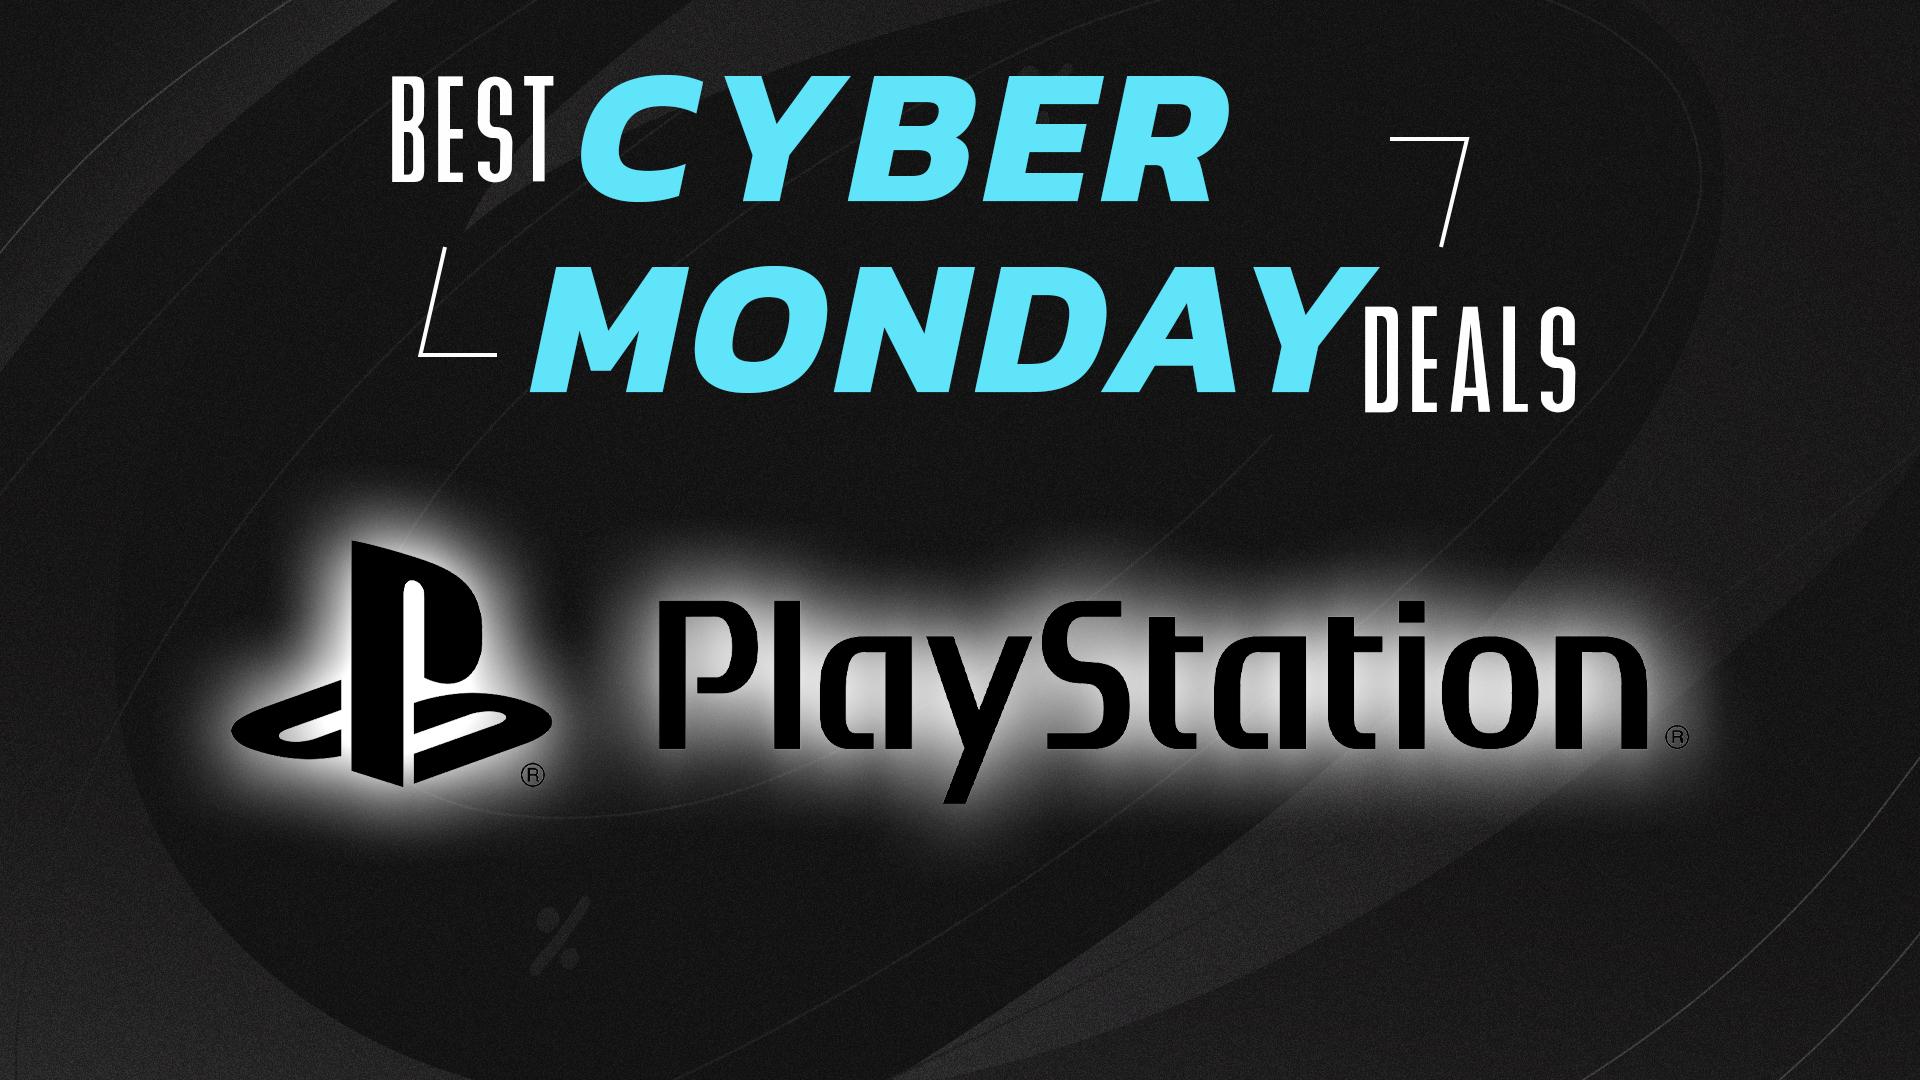 PS4 Cyber Monday 2017 Deal Gets You PS Plus Membership For Cheap Right Now  - GameSpot